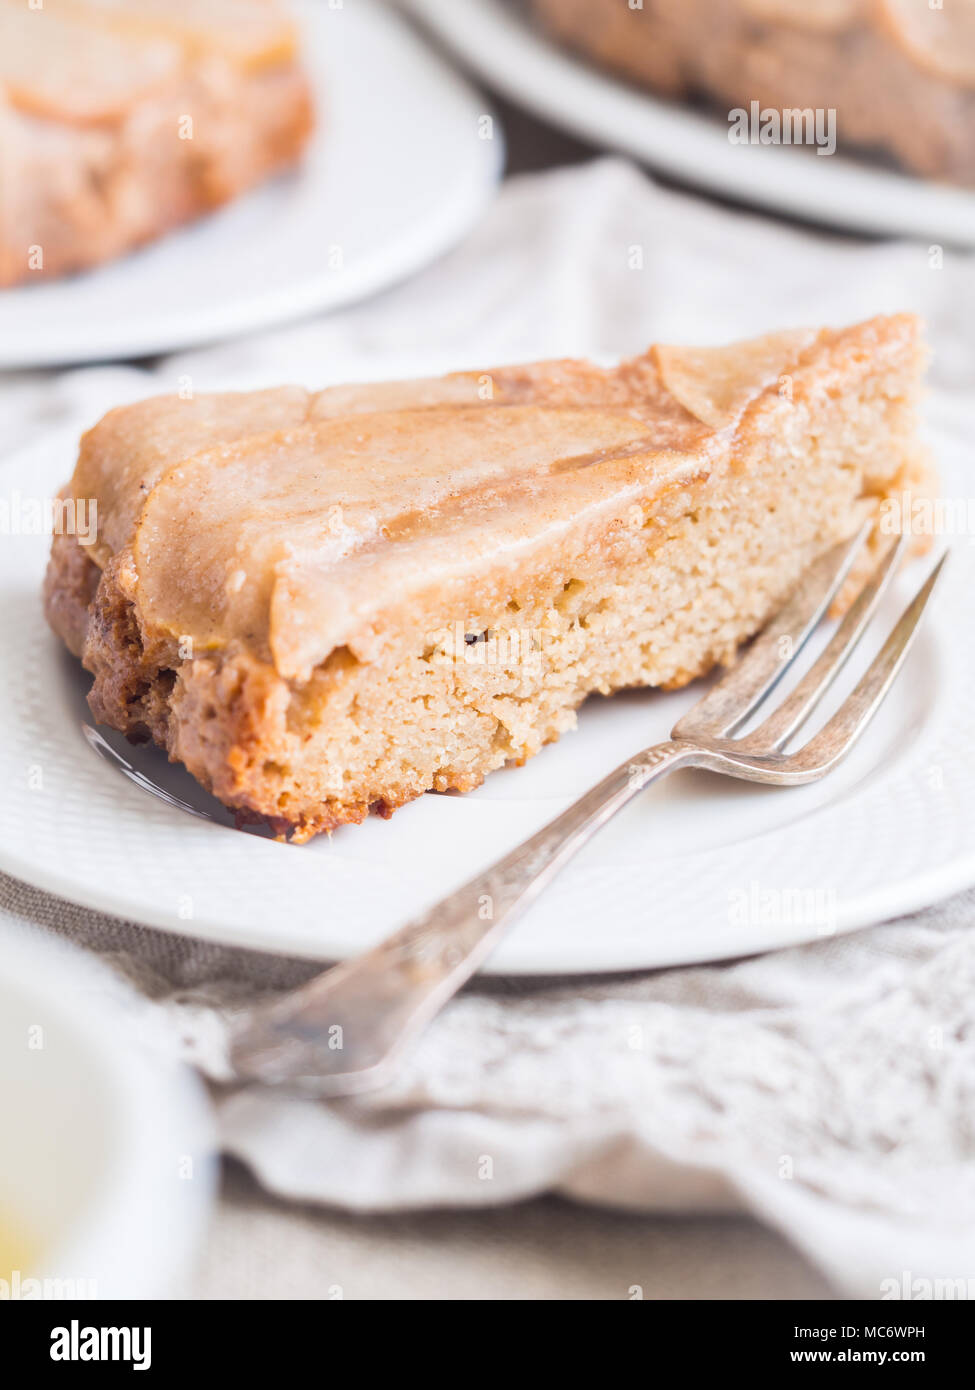 Slice of rustic upside down gluten and sugar free paleo pear cake. Stock Photo